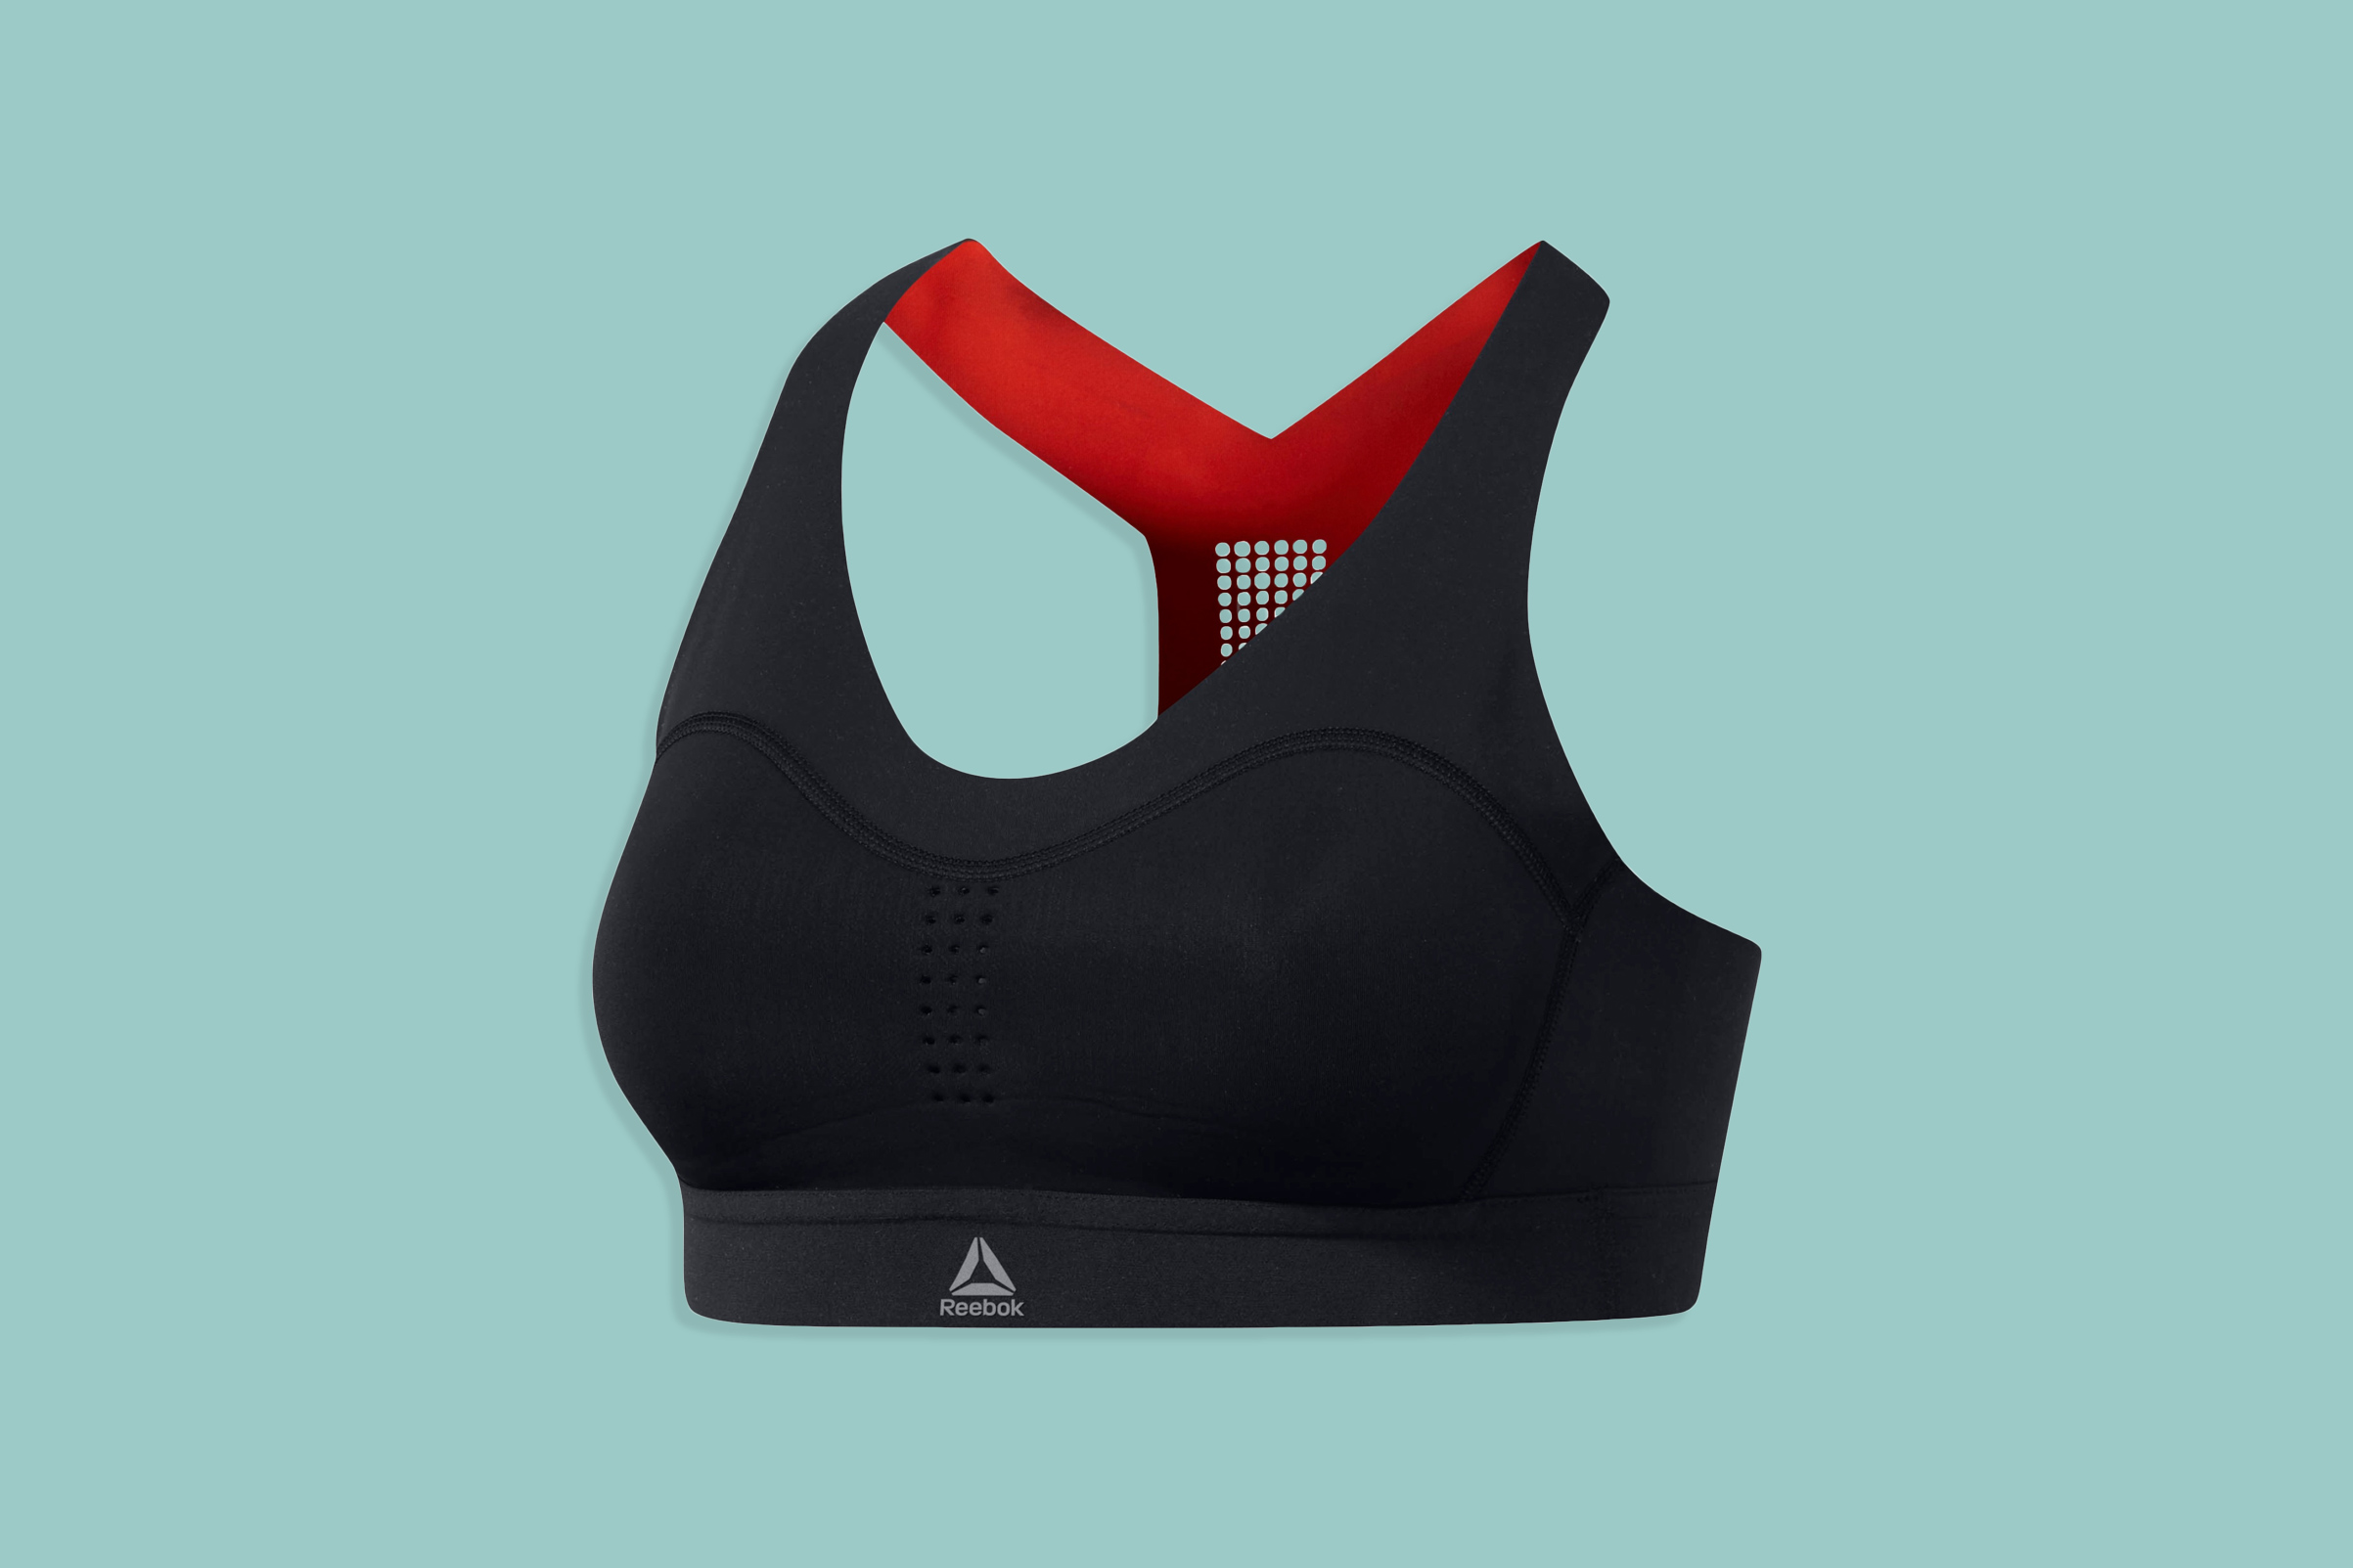 Reebok PureMove One of TIME's Best Inventions 2018 | Time.com